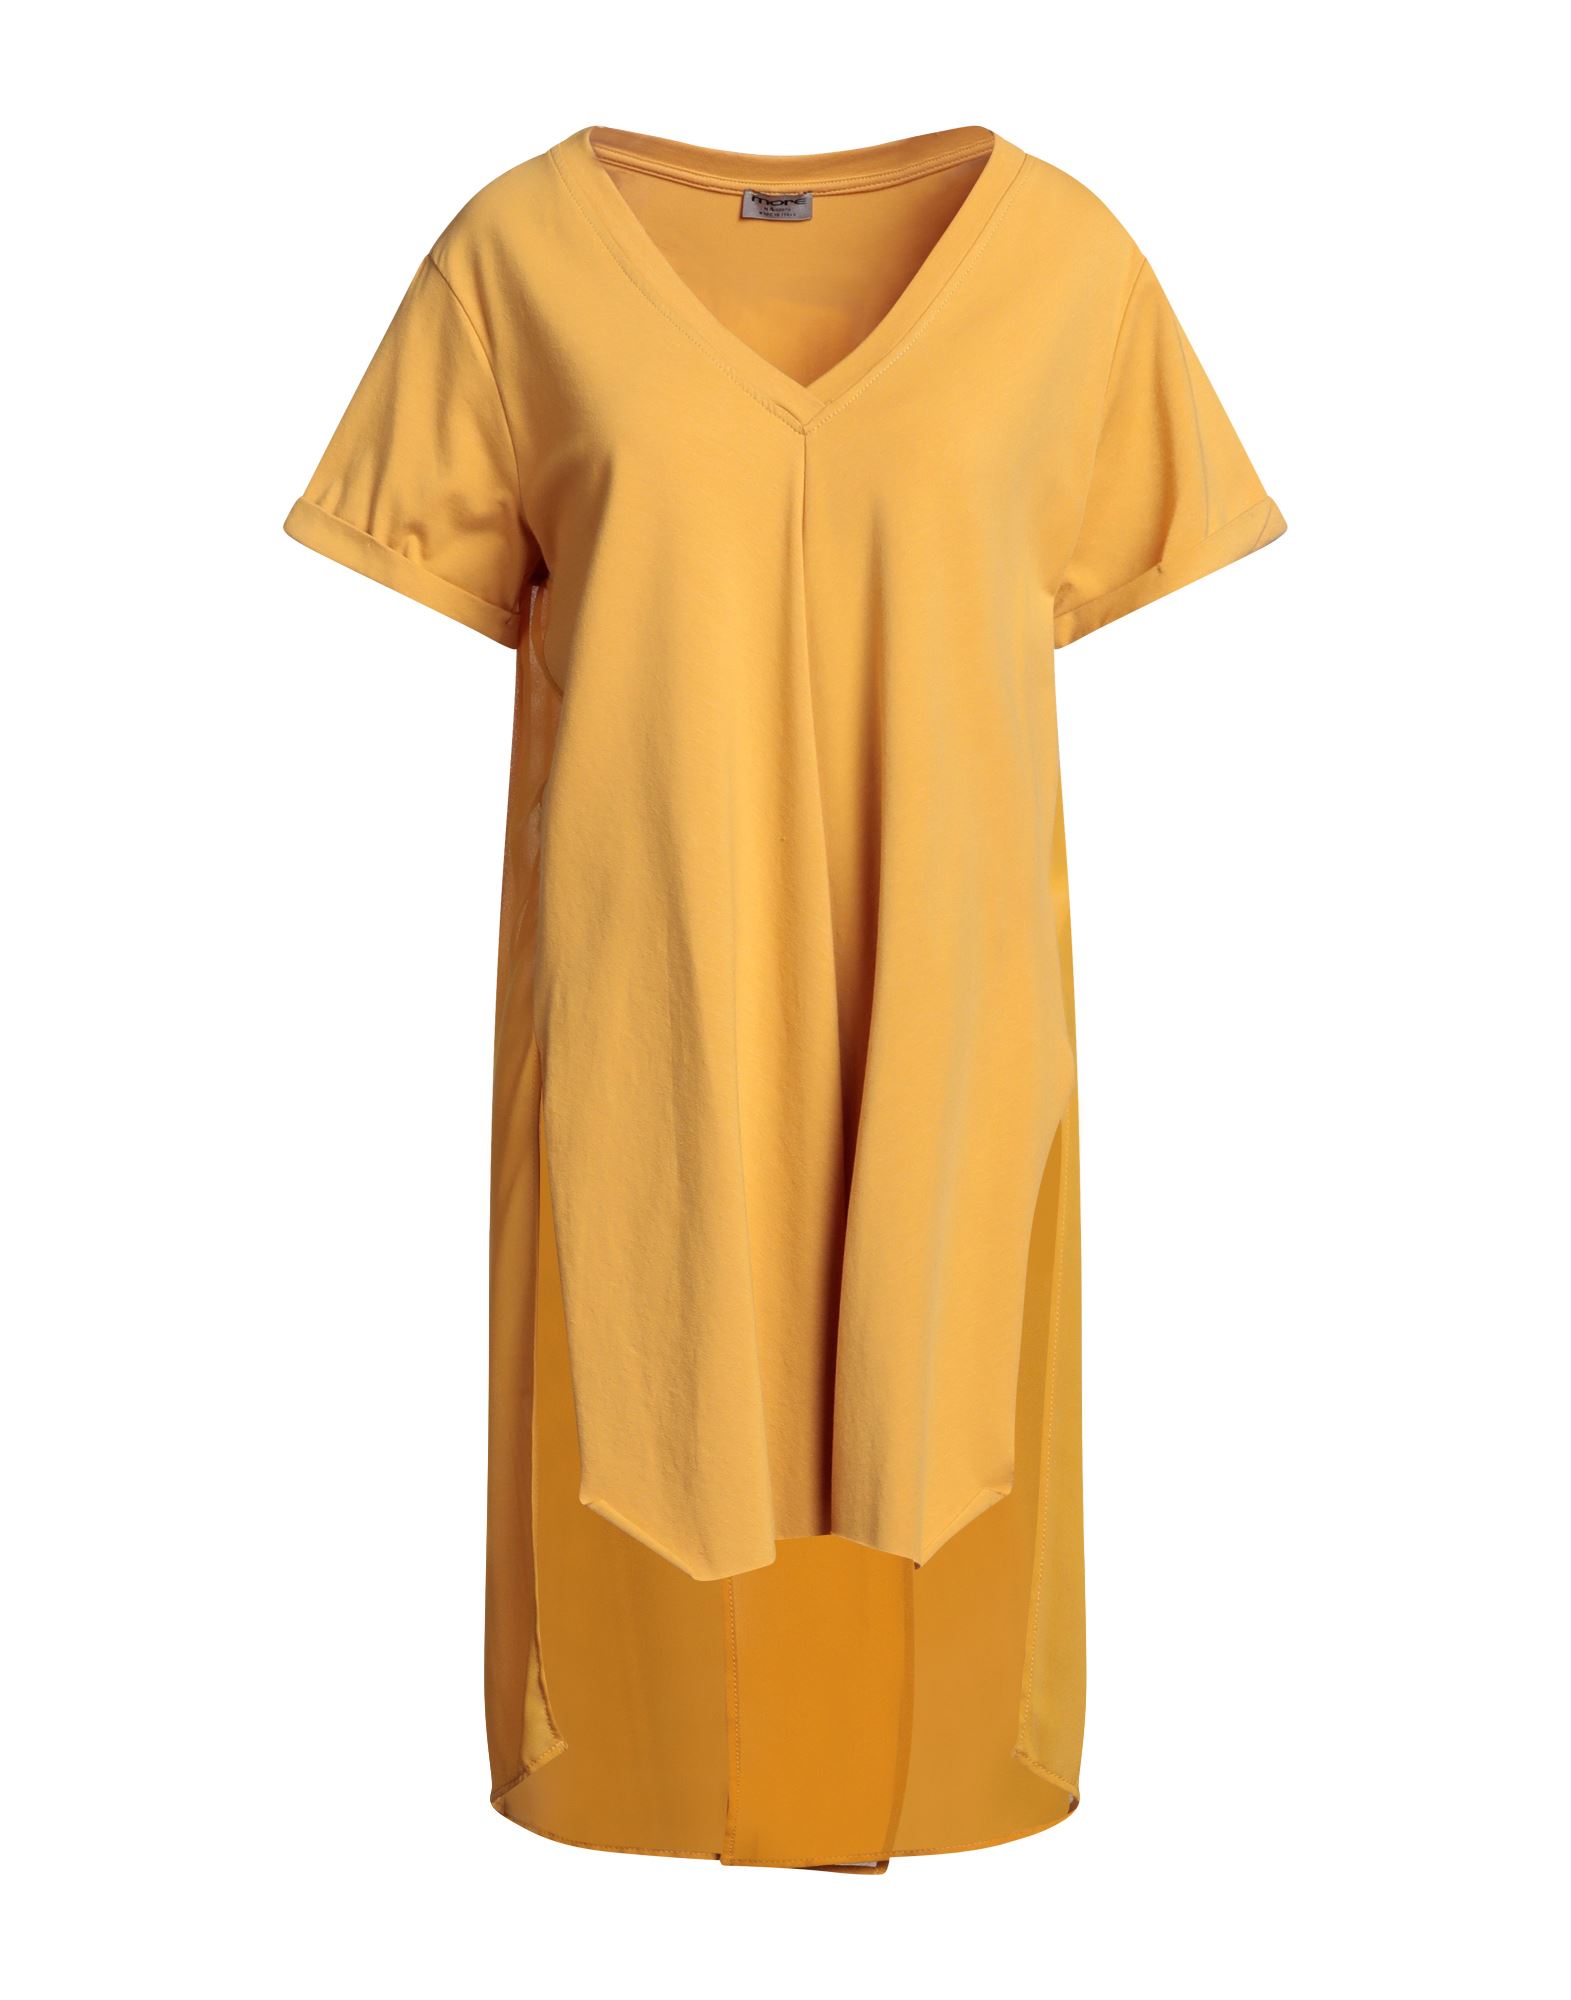 More By Siste's Woman T-shirt Ocher Size Xs Polyester, Cotton, Elastane In Yellow